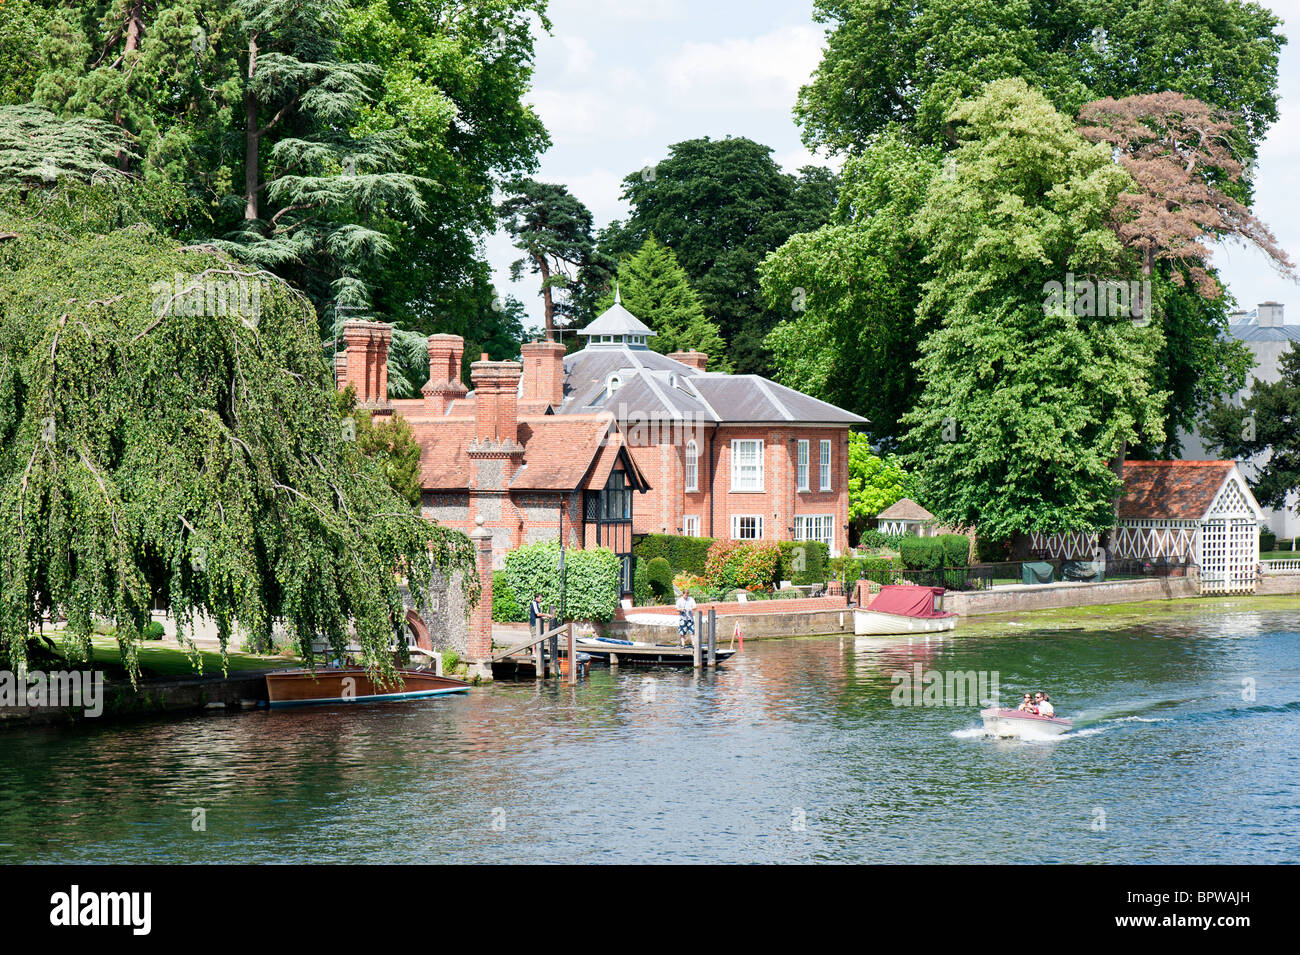 Marlow historic town situated on the River Thames, Buckinghamshire, England, United Kingdom Stock Photo